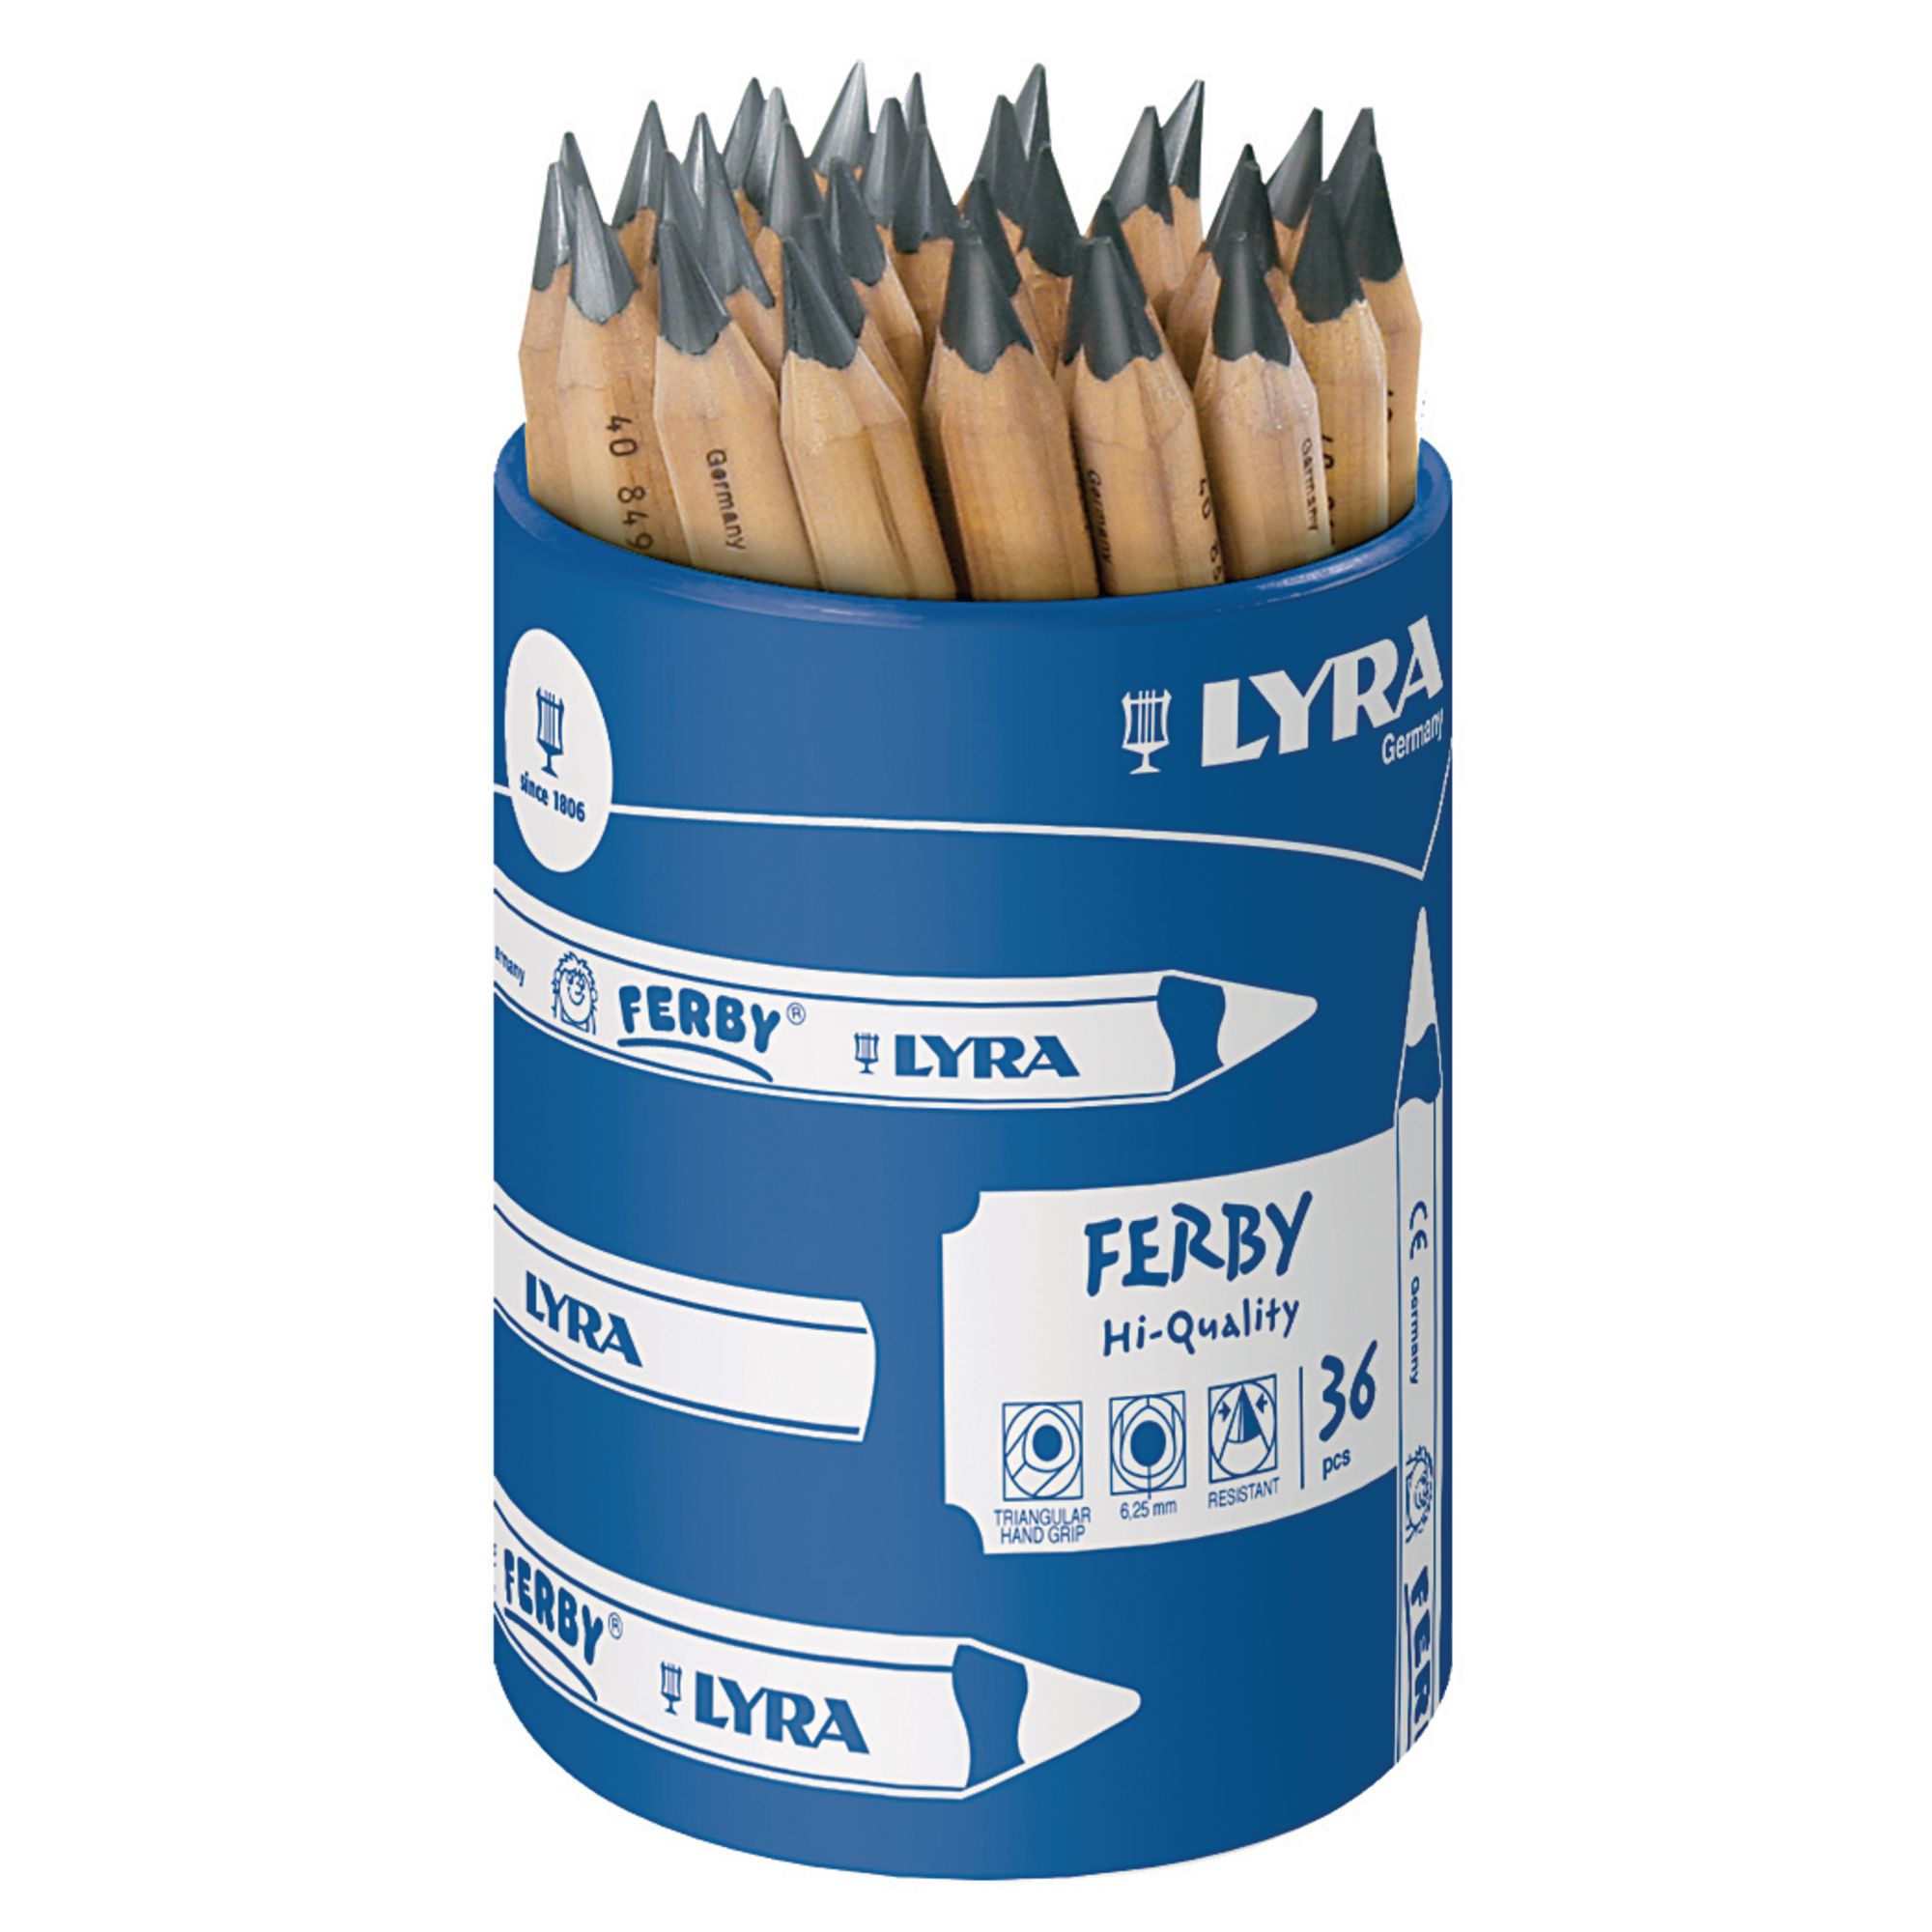 HE1014882 LYRA Ferby Graphite Pencils Tub of 36 Findel Education